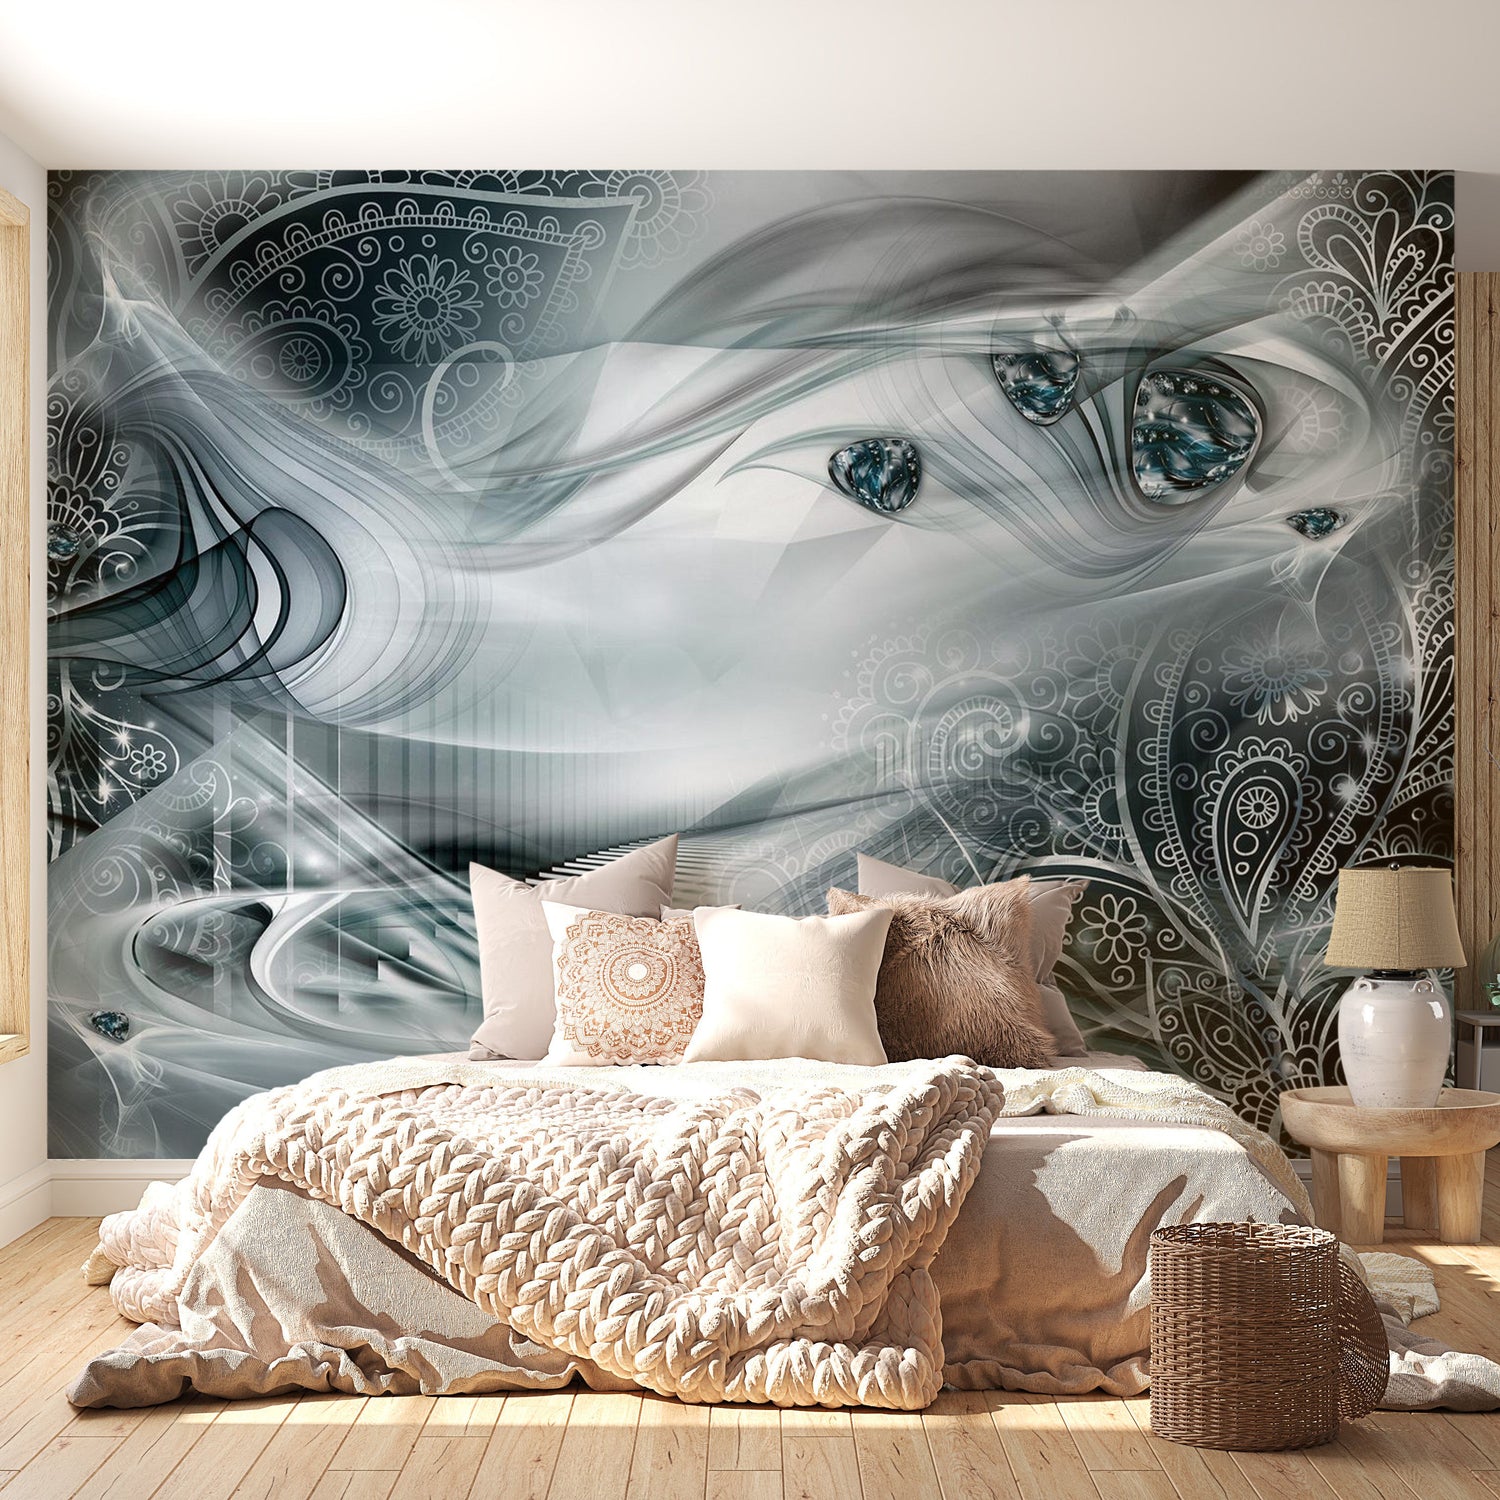 Peel & Stick Glam Wall Mural - Autumn Evenings Turquoise - Removable Wall Decals